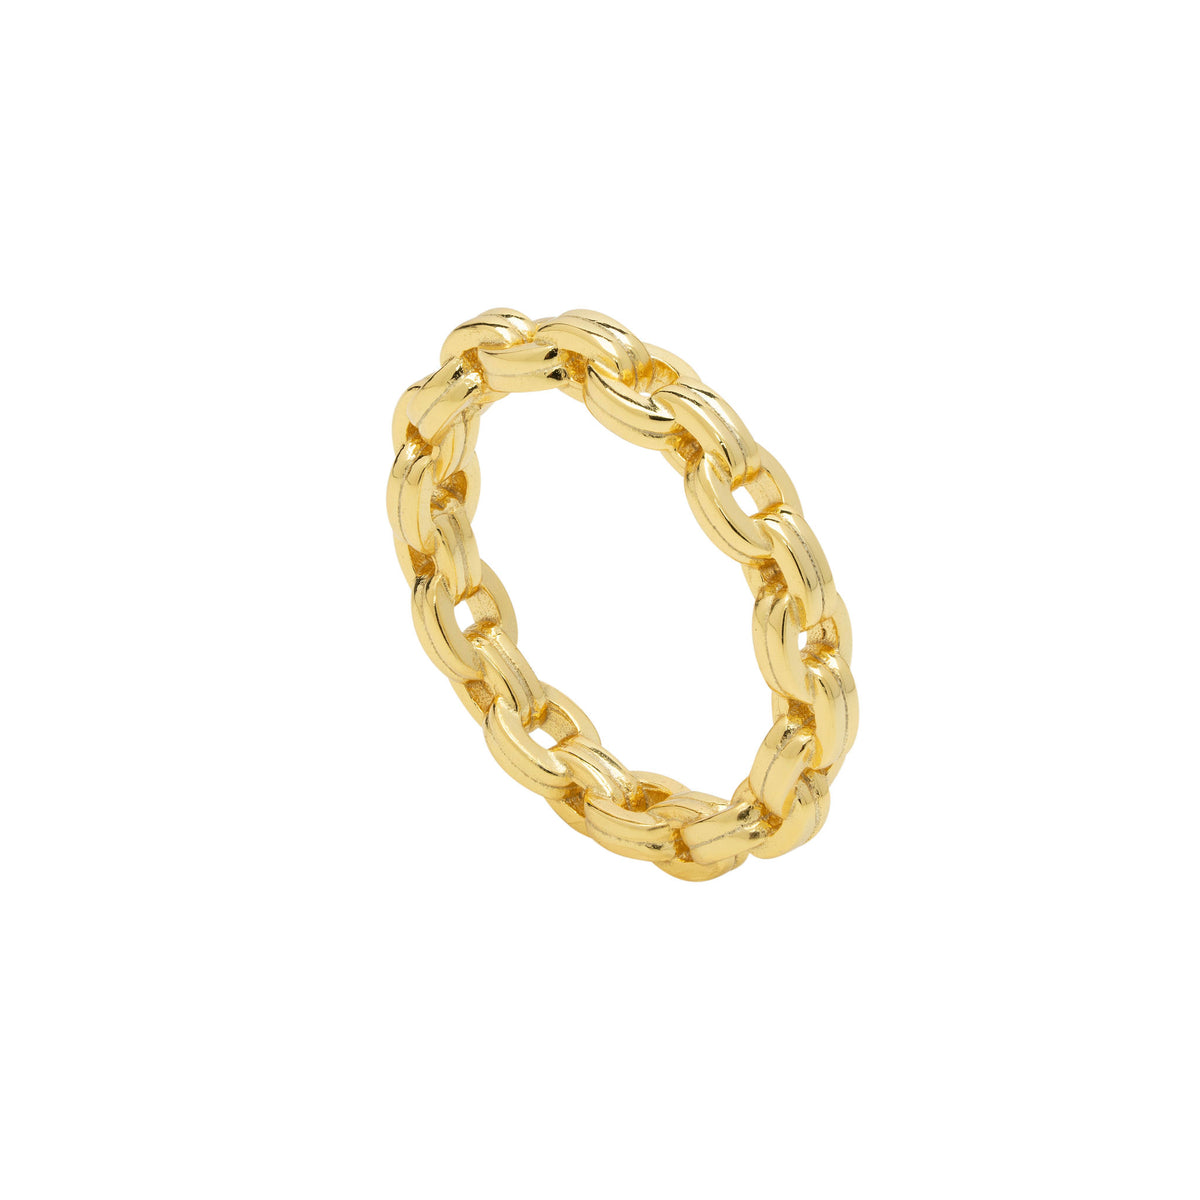 LINKED GOLD RING